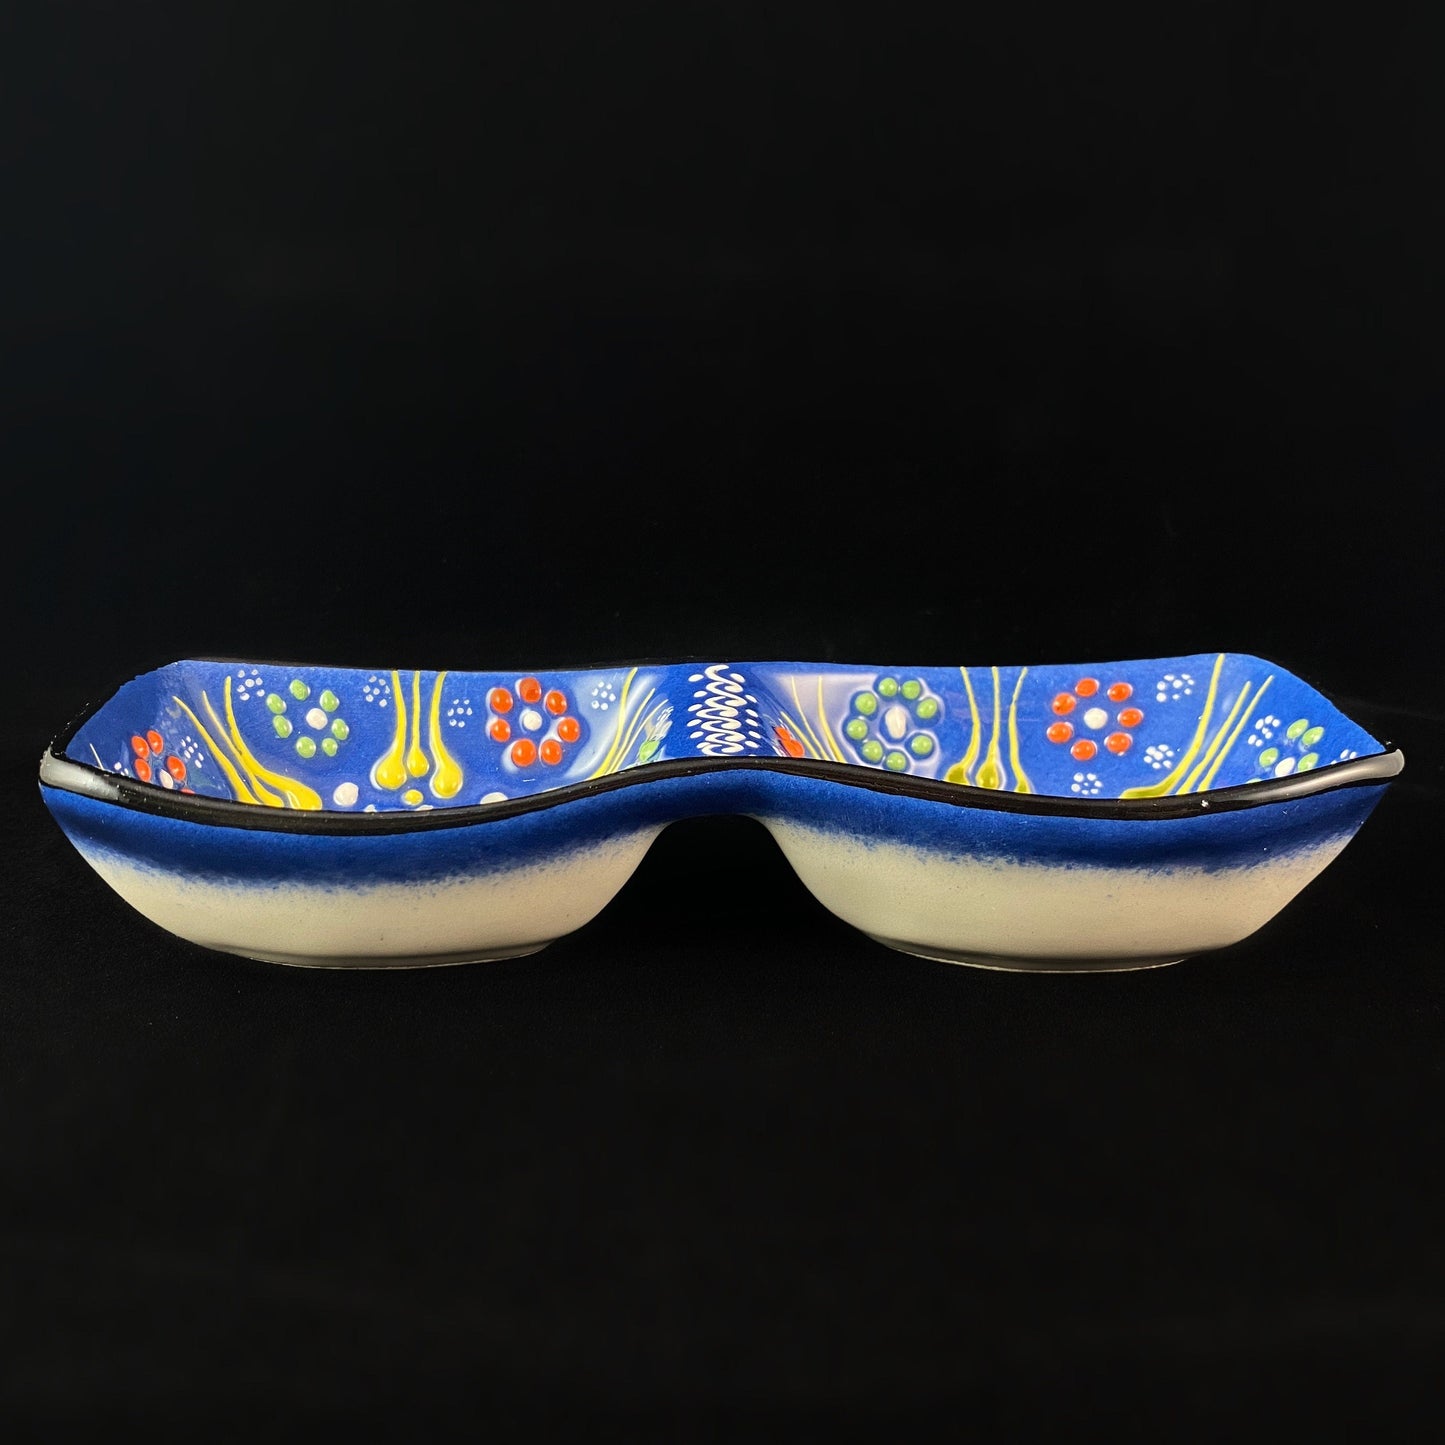 Handmade Double Sided Dip/Snack Tray, Functional and Decorative Turkish Pottery, Cottagecore Style, Blue